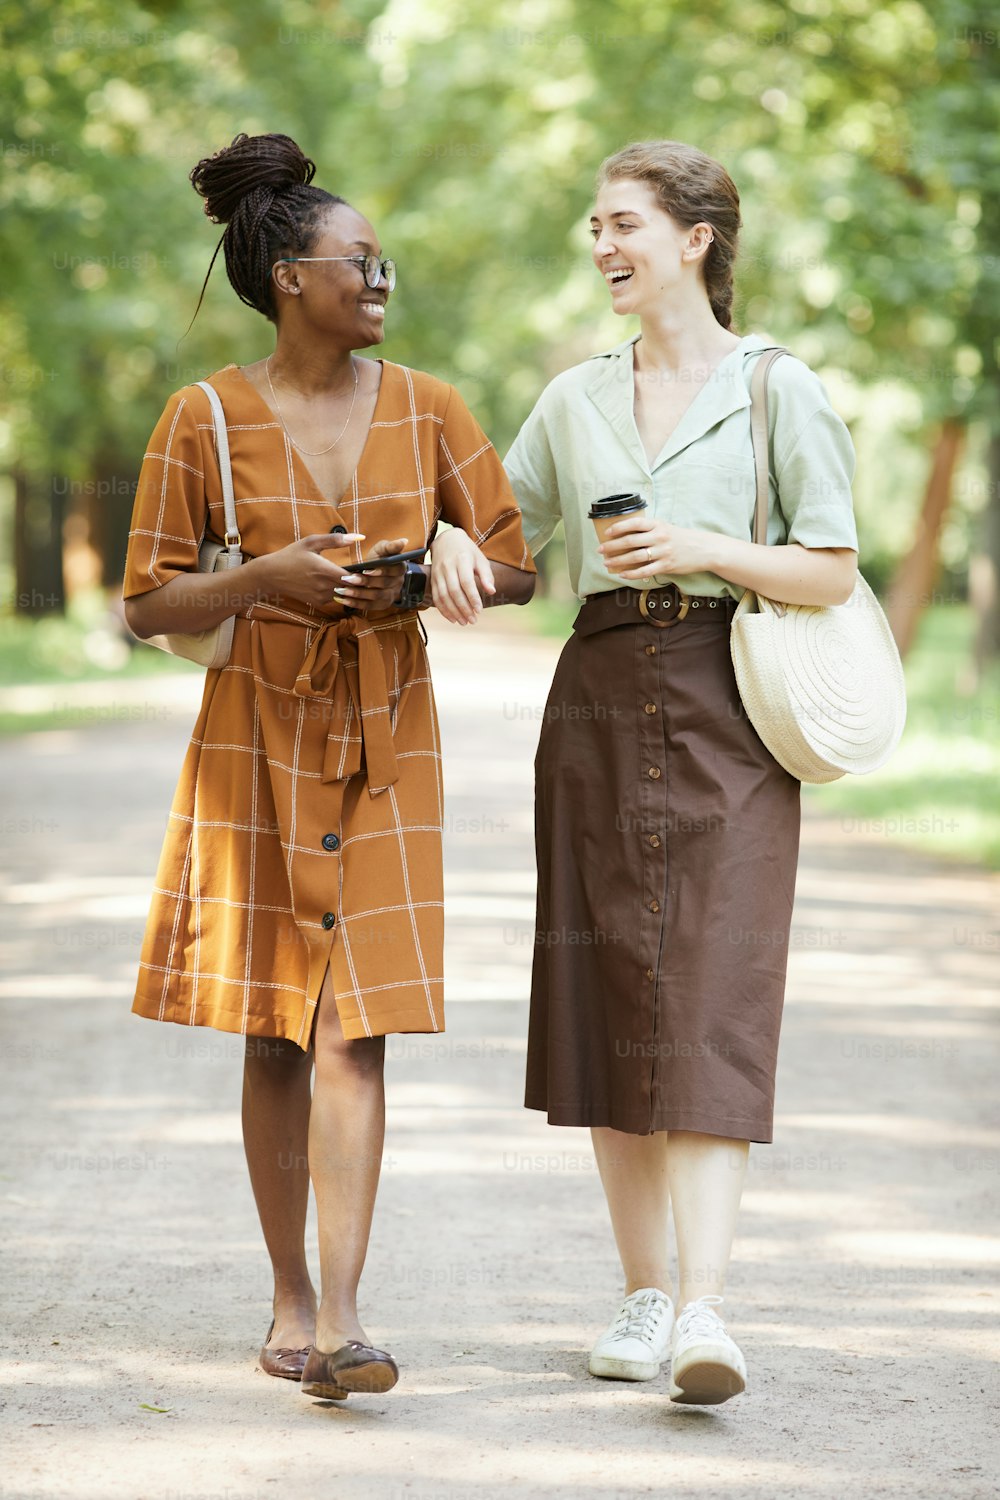 Vertical full length portrait of two smiling young women chatting outdoors while enjoying walk in park together